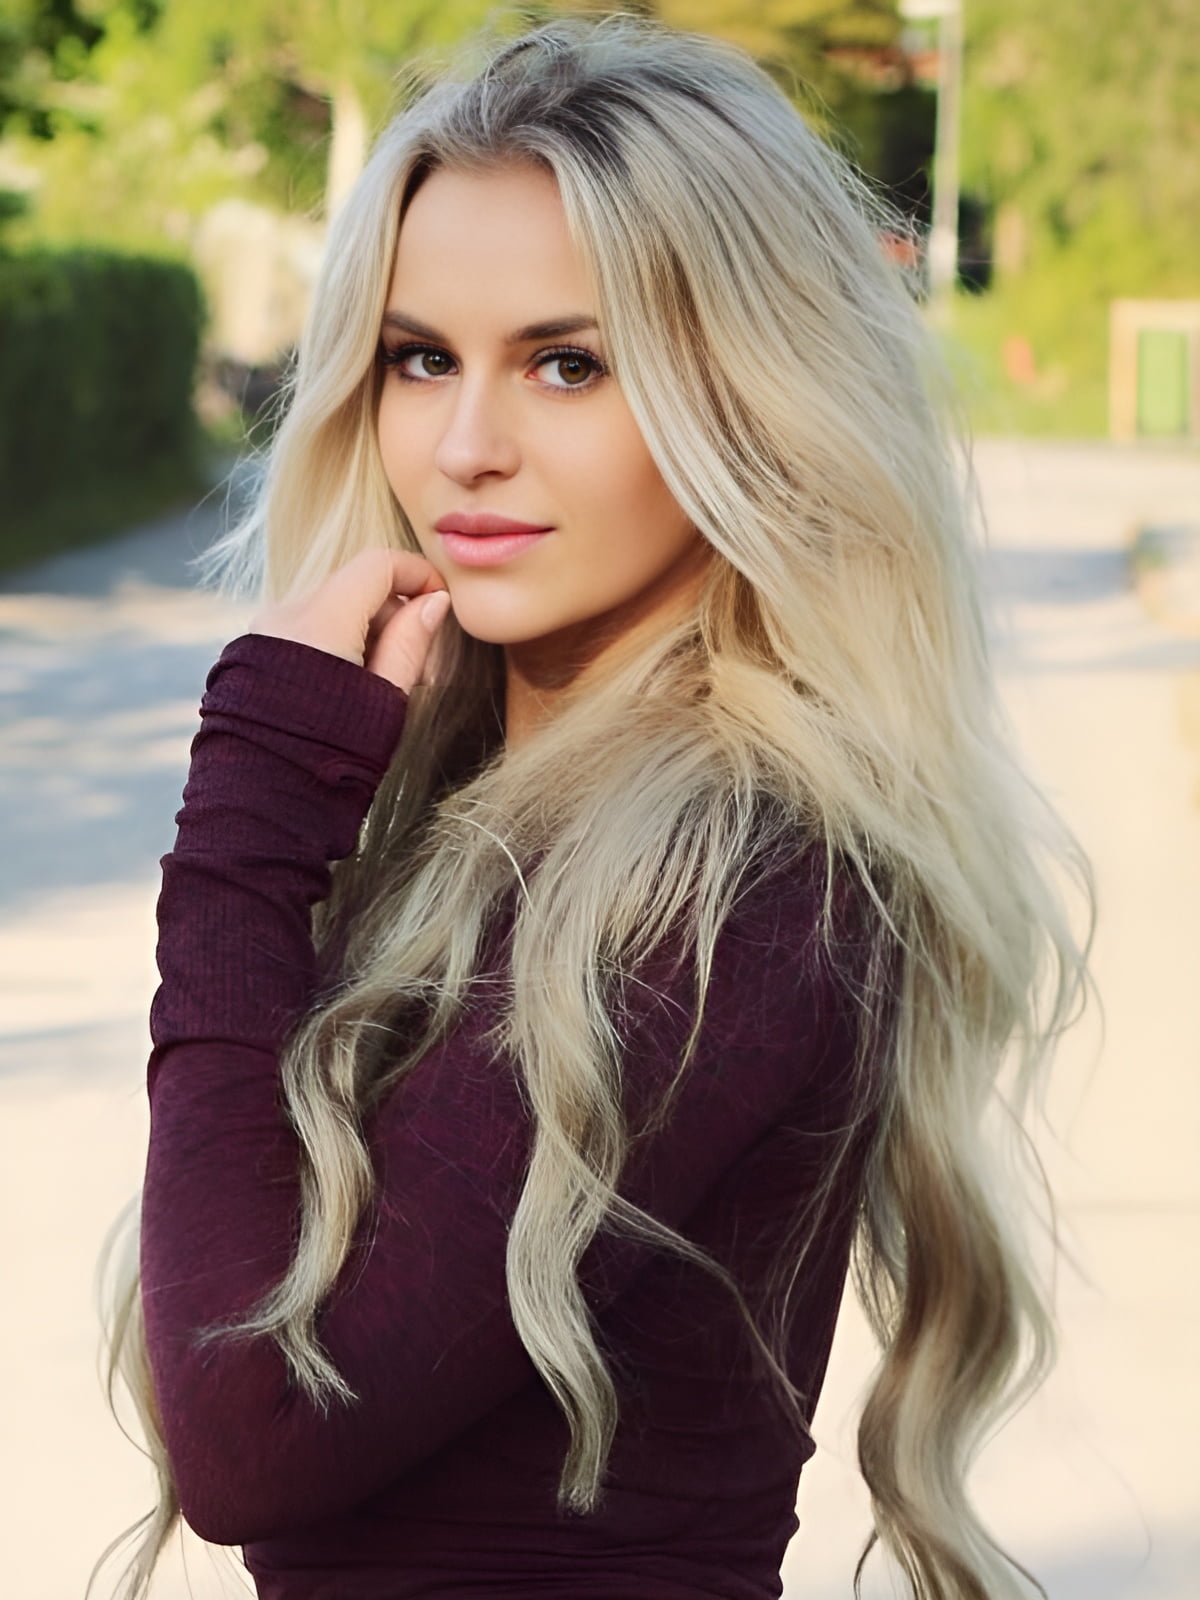 Anna Nystrom (Model) Wiki, Age, Height, Family, Ethnicity and More